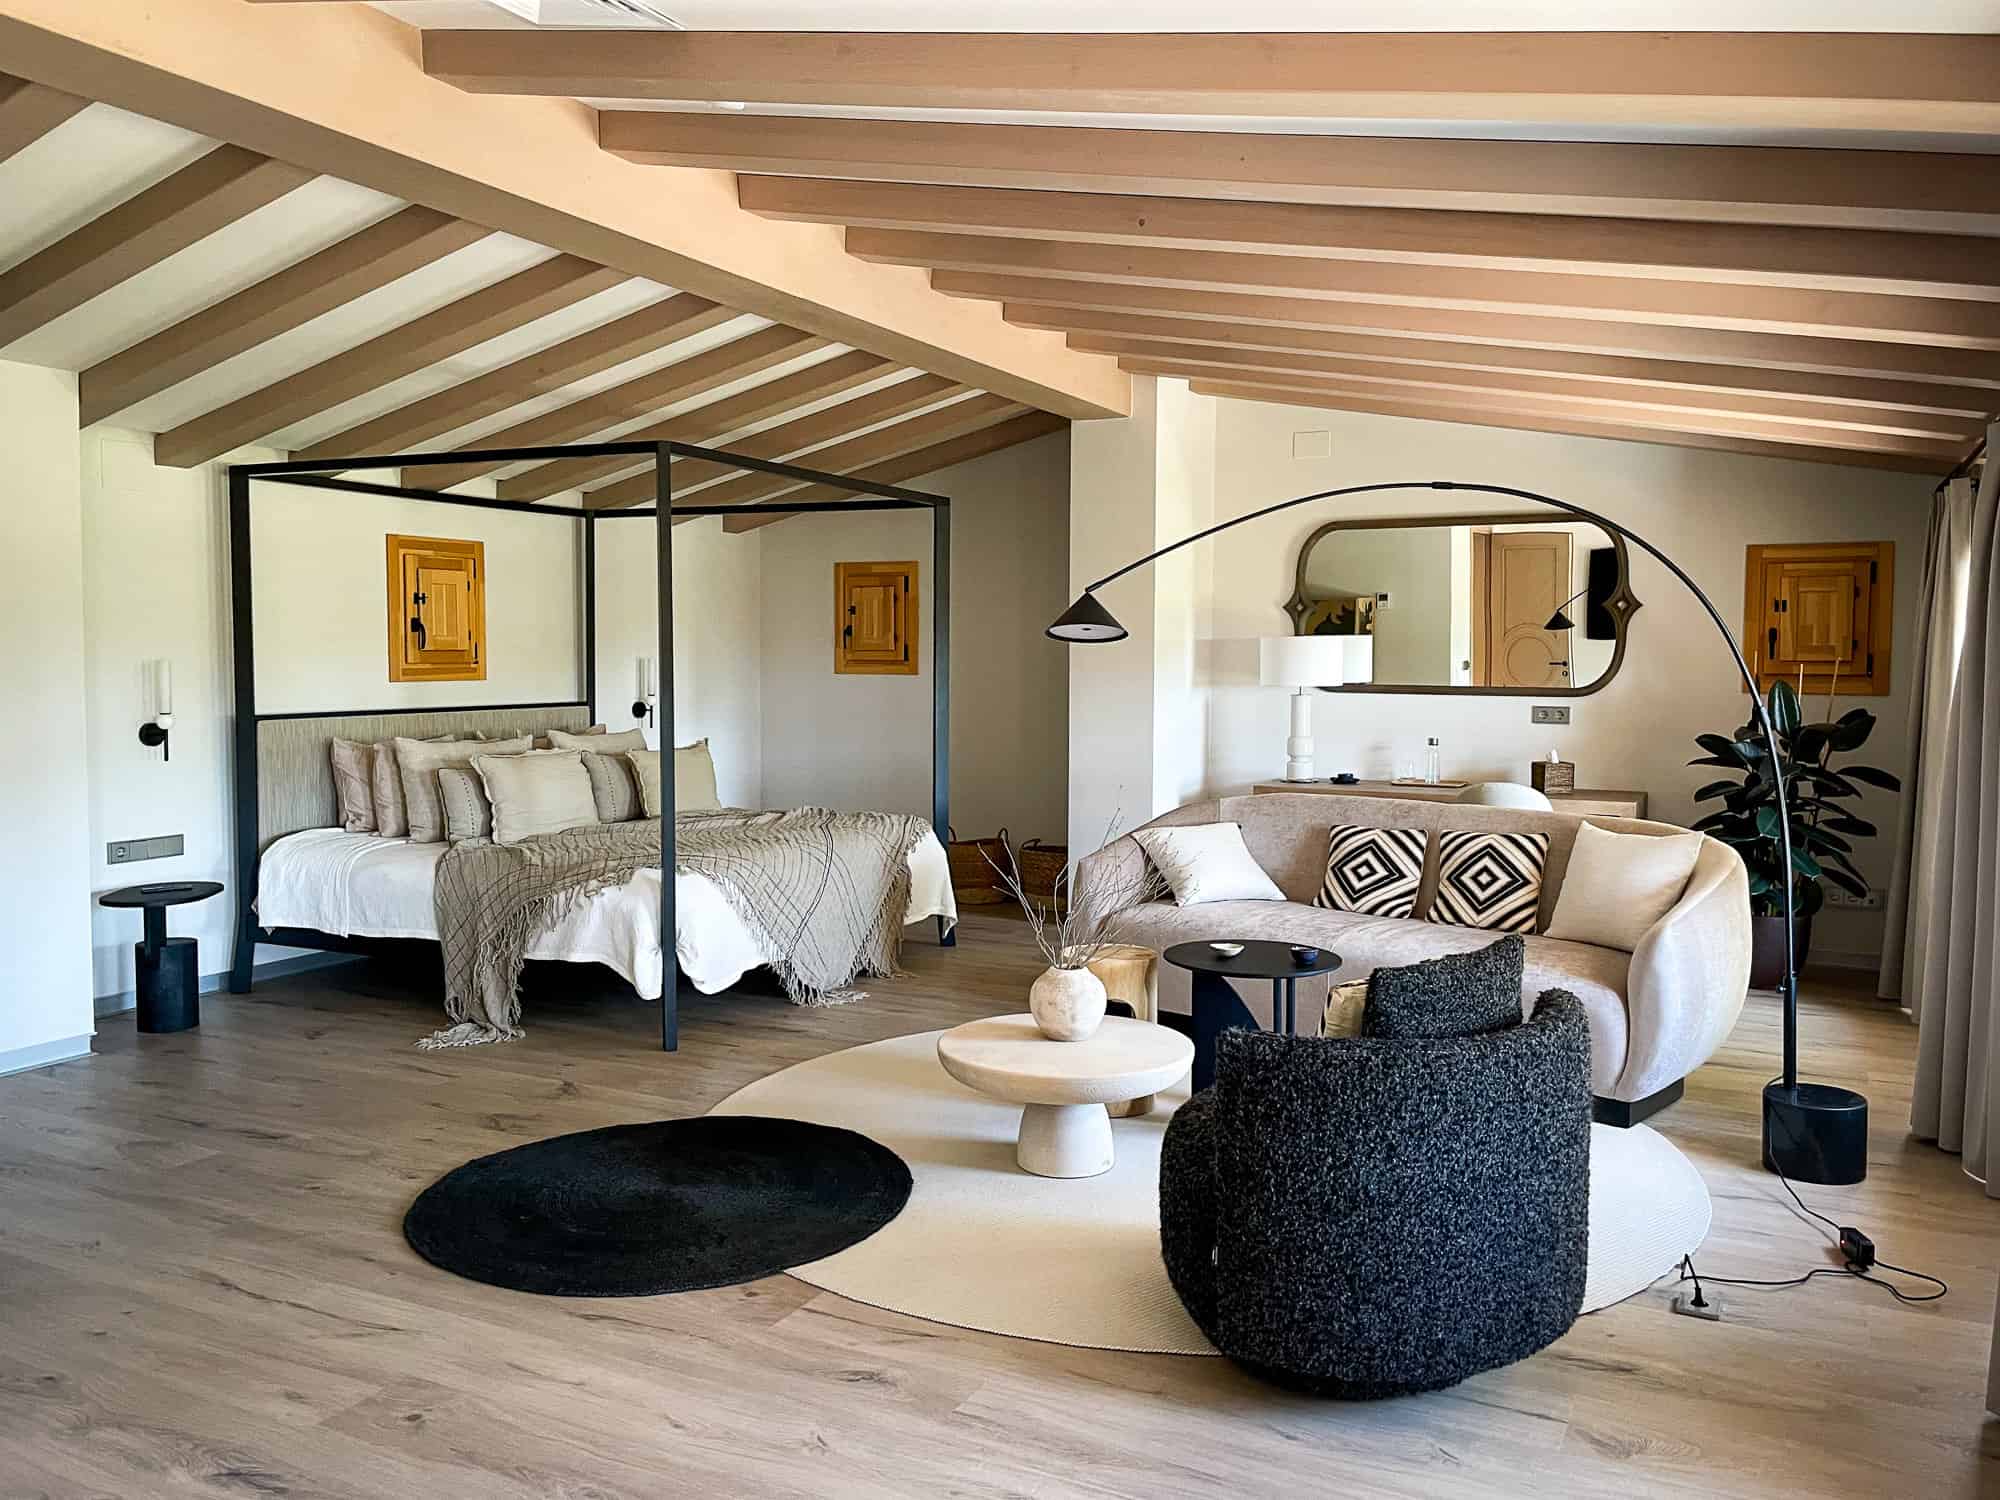 The master bedroom at Masia Cabellut, a luxury villa near Barcelona with a private pool